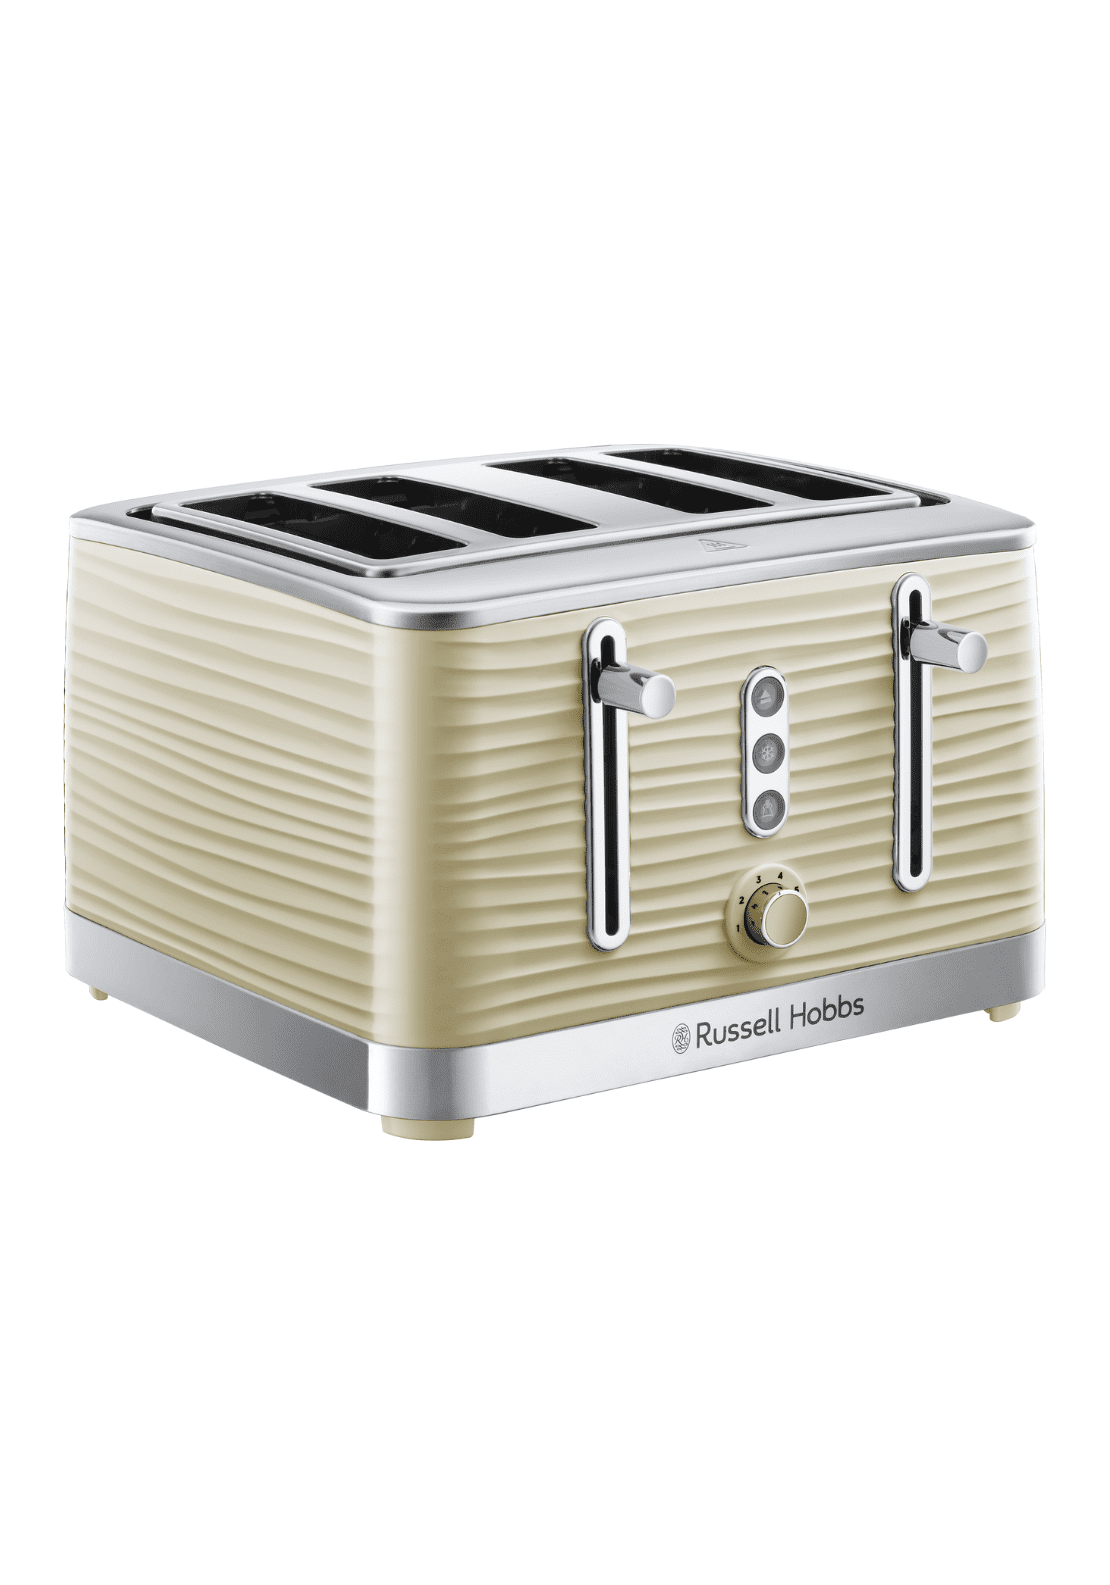 Russell Hobbs Inspire 4 Slice Toaster - Cream 1 Shaws Department Stores